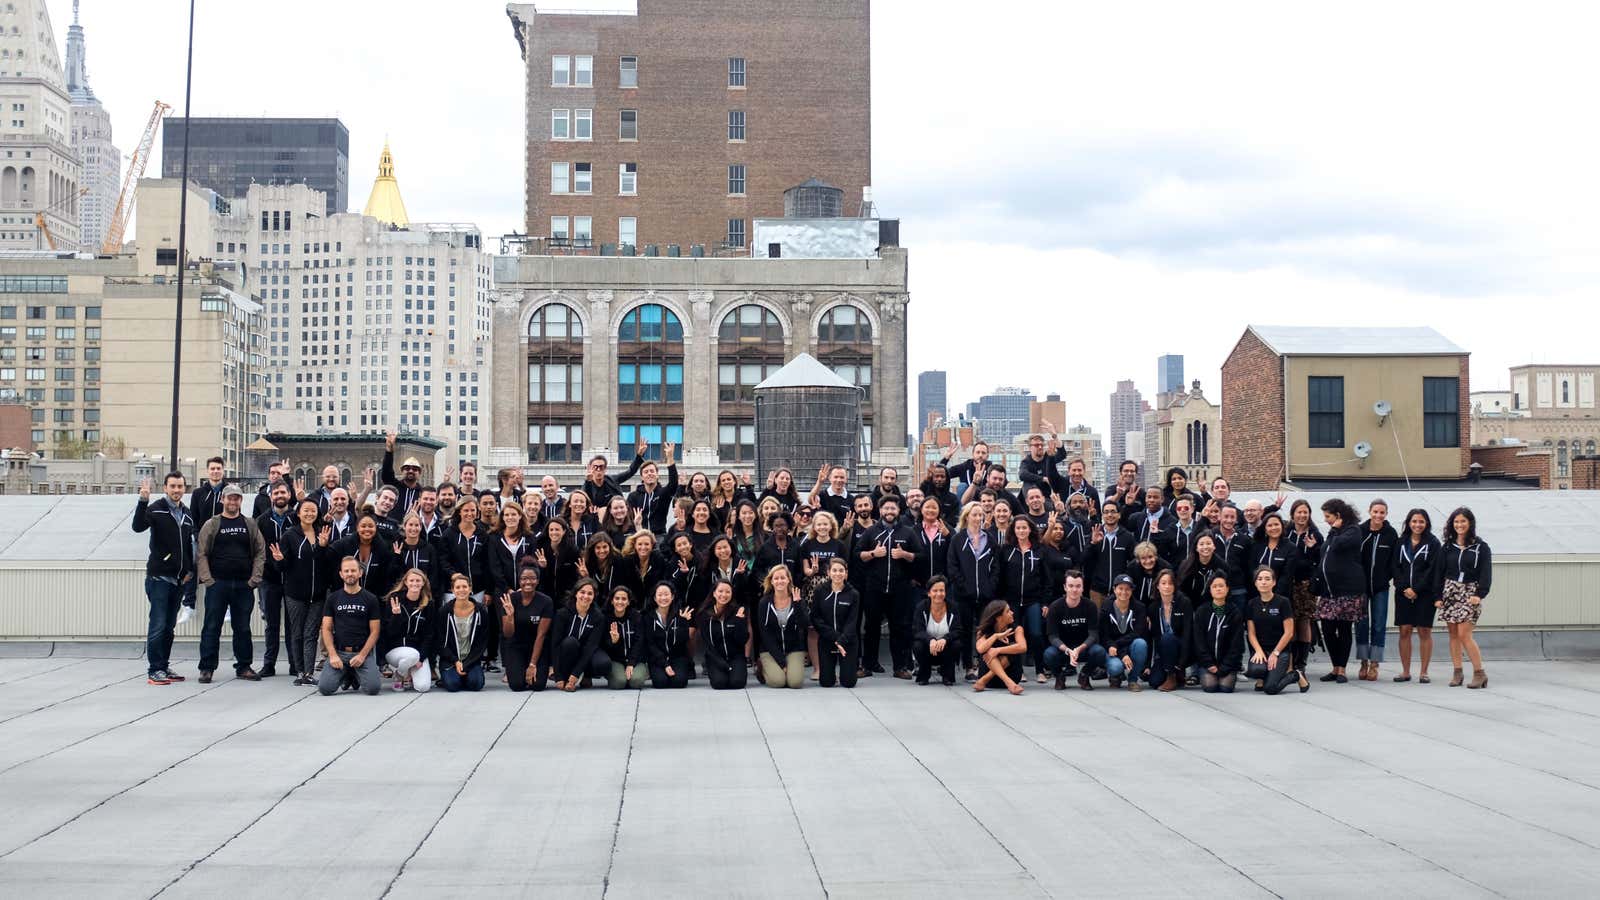 Quartz’s New York-based staff assembled on our rooftop this week to celebrate turning three.